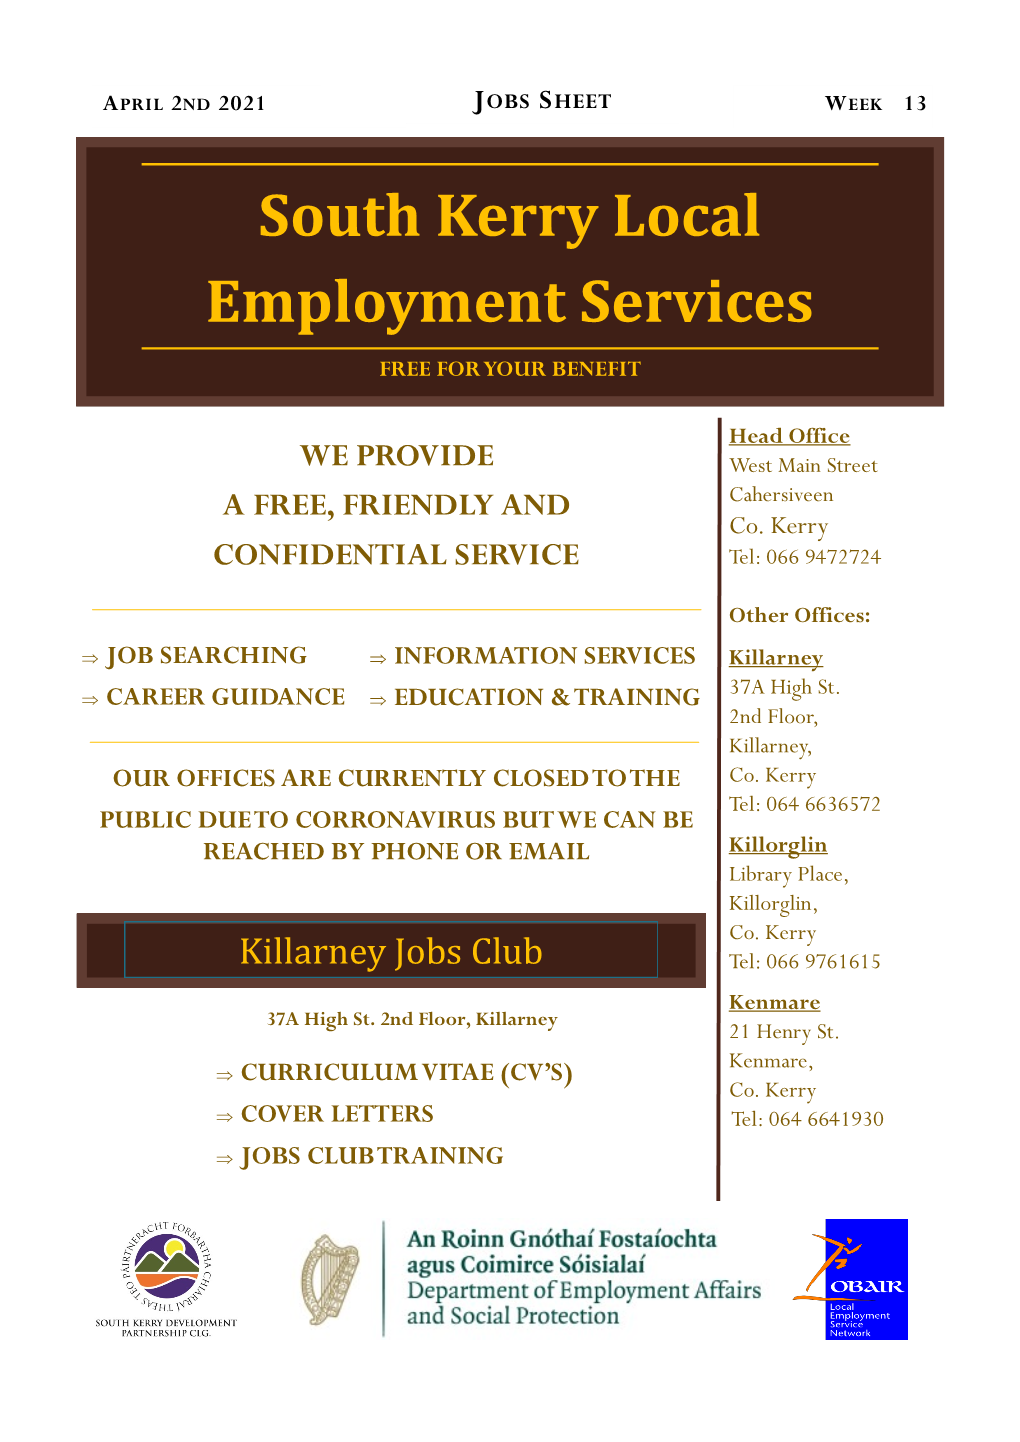 South Kerry Local Employment Services FREE for YOUR BENEFIT